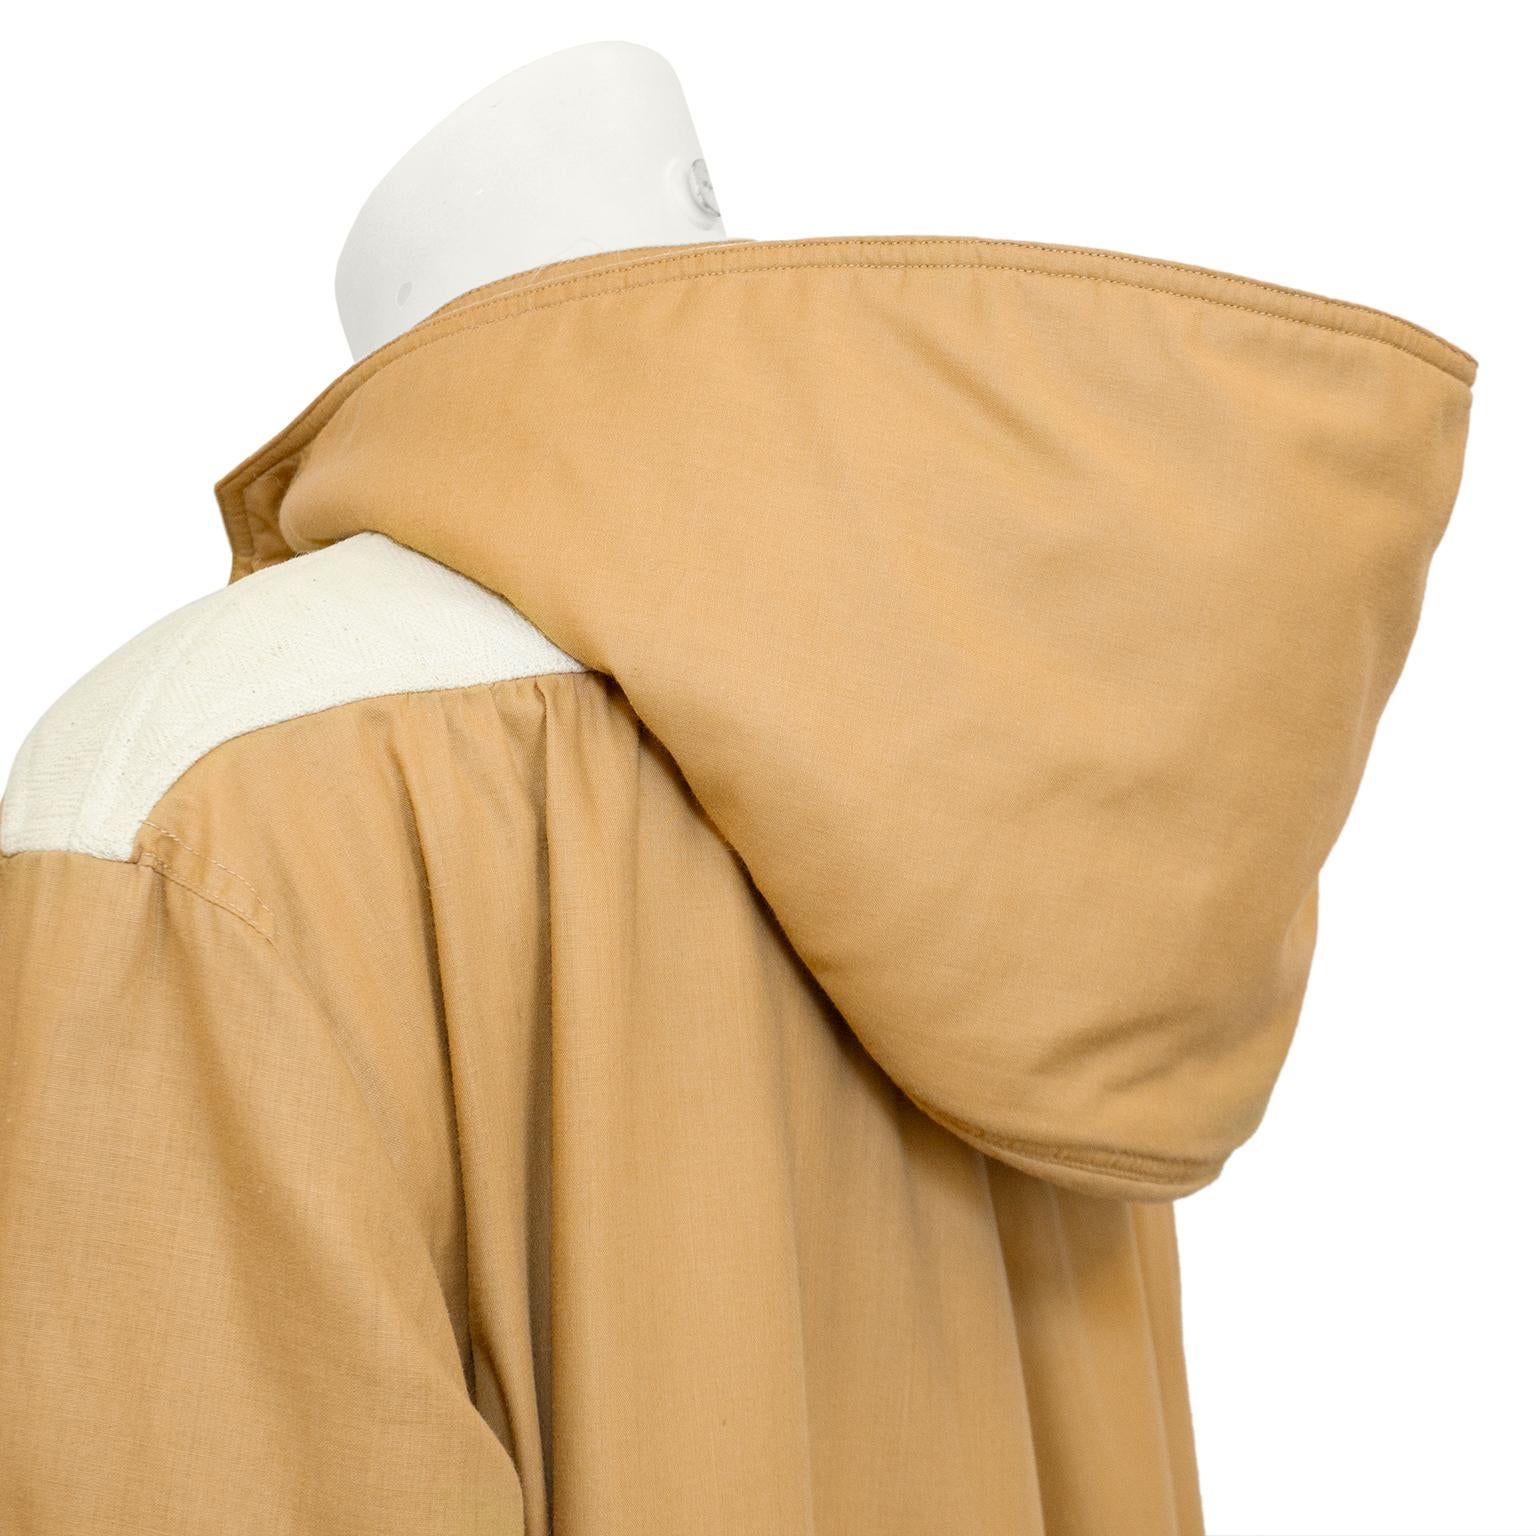 1970s Courreges Camel Car Coat with Hood  For Sale 1